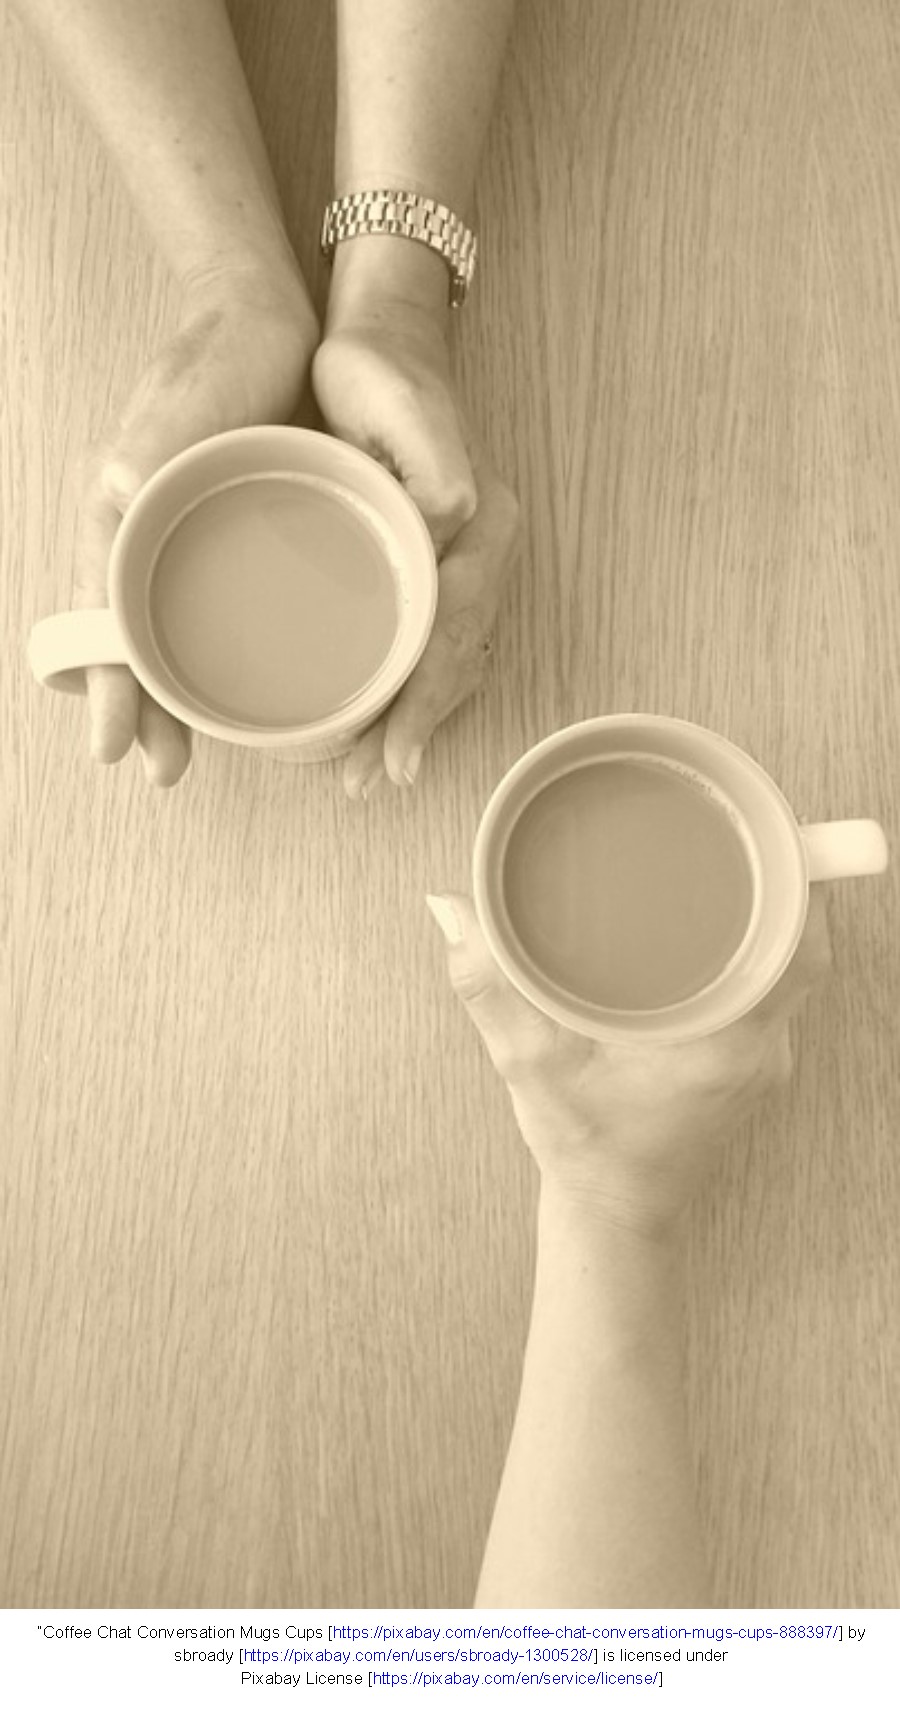 Overhead view of hands holding mugs 